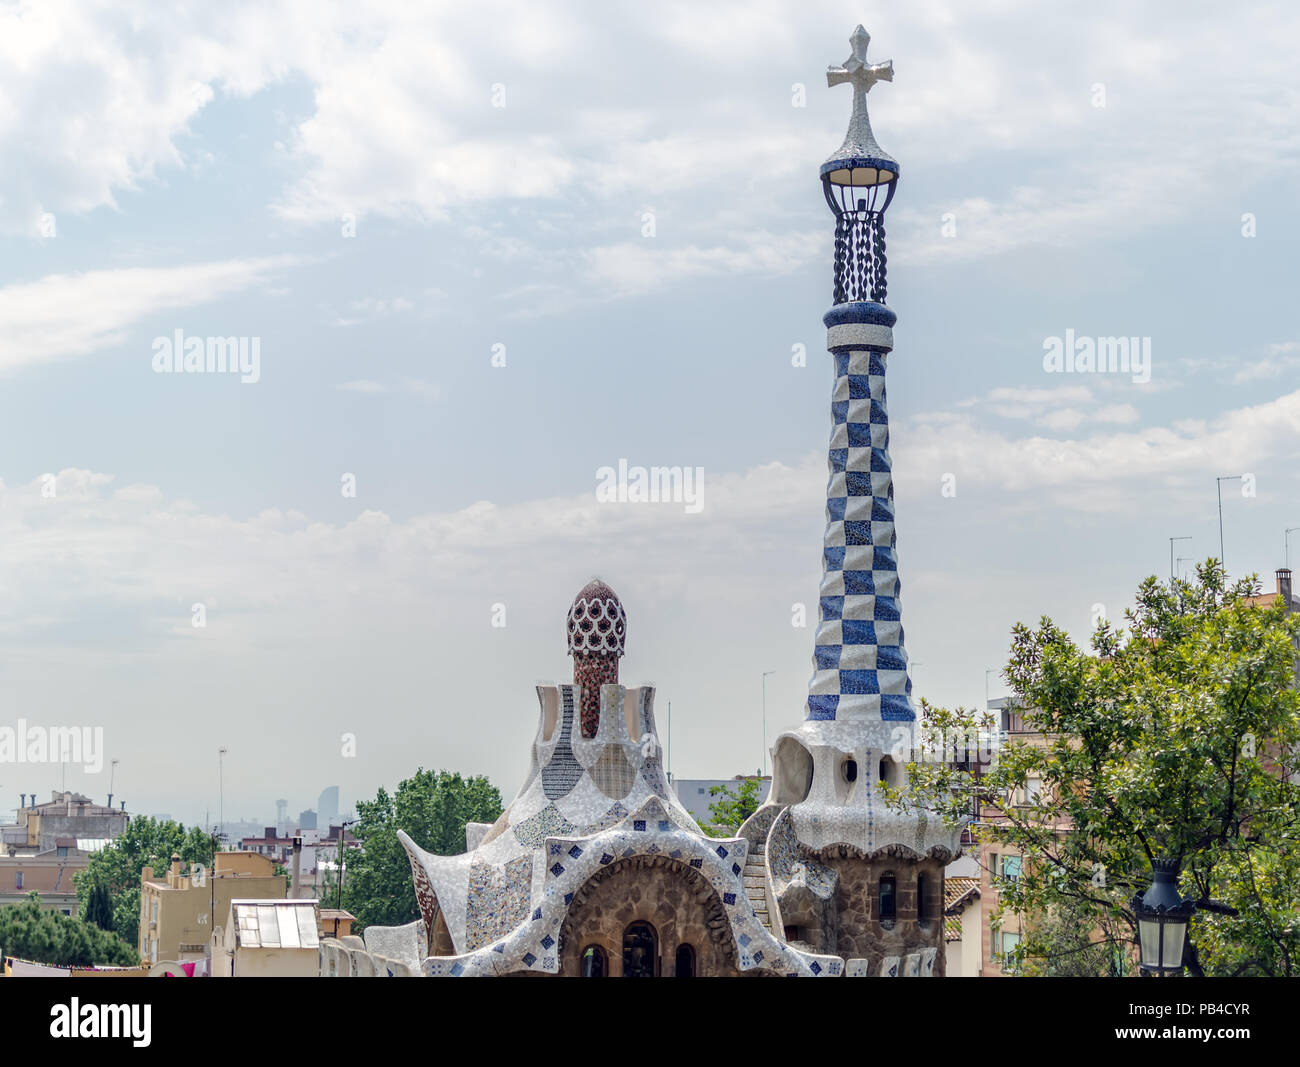 View to the fairytale gingerbread lodge with rooftop terrace crowed with a four-armed cross against the blue cloudy sky in Park Guell, Barcelona, Spai Stock Photo